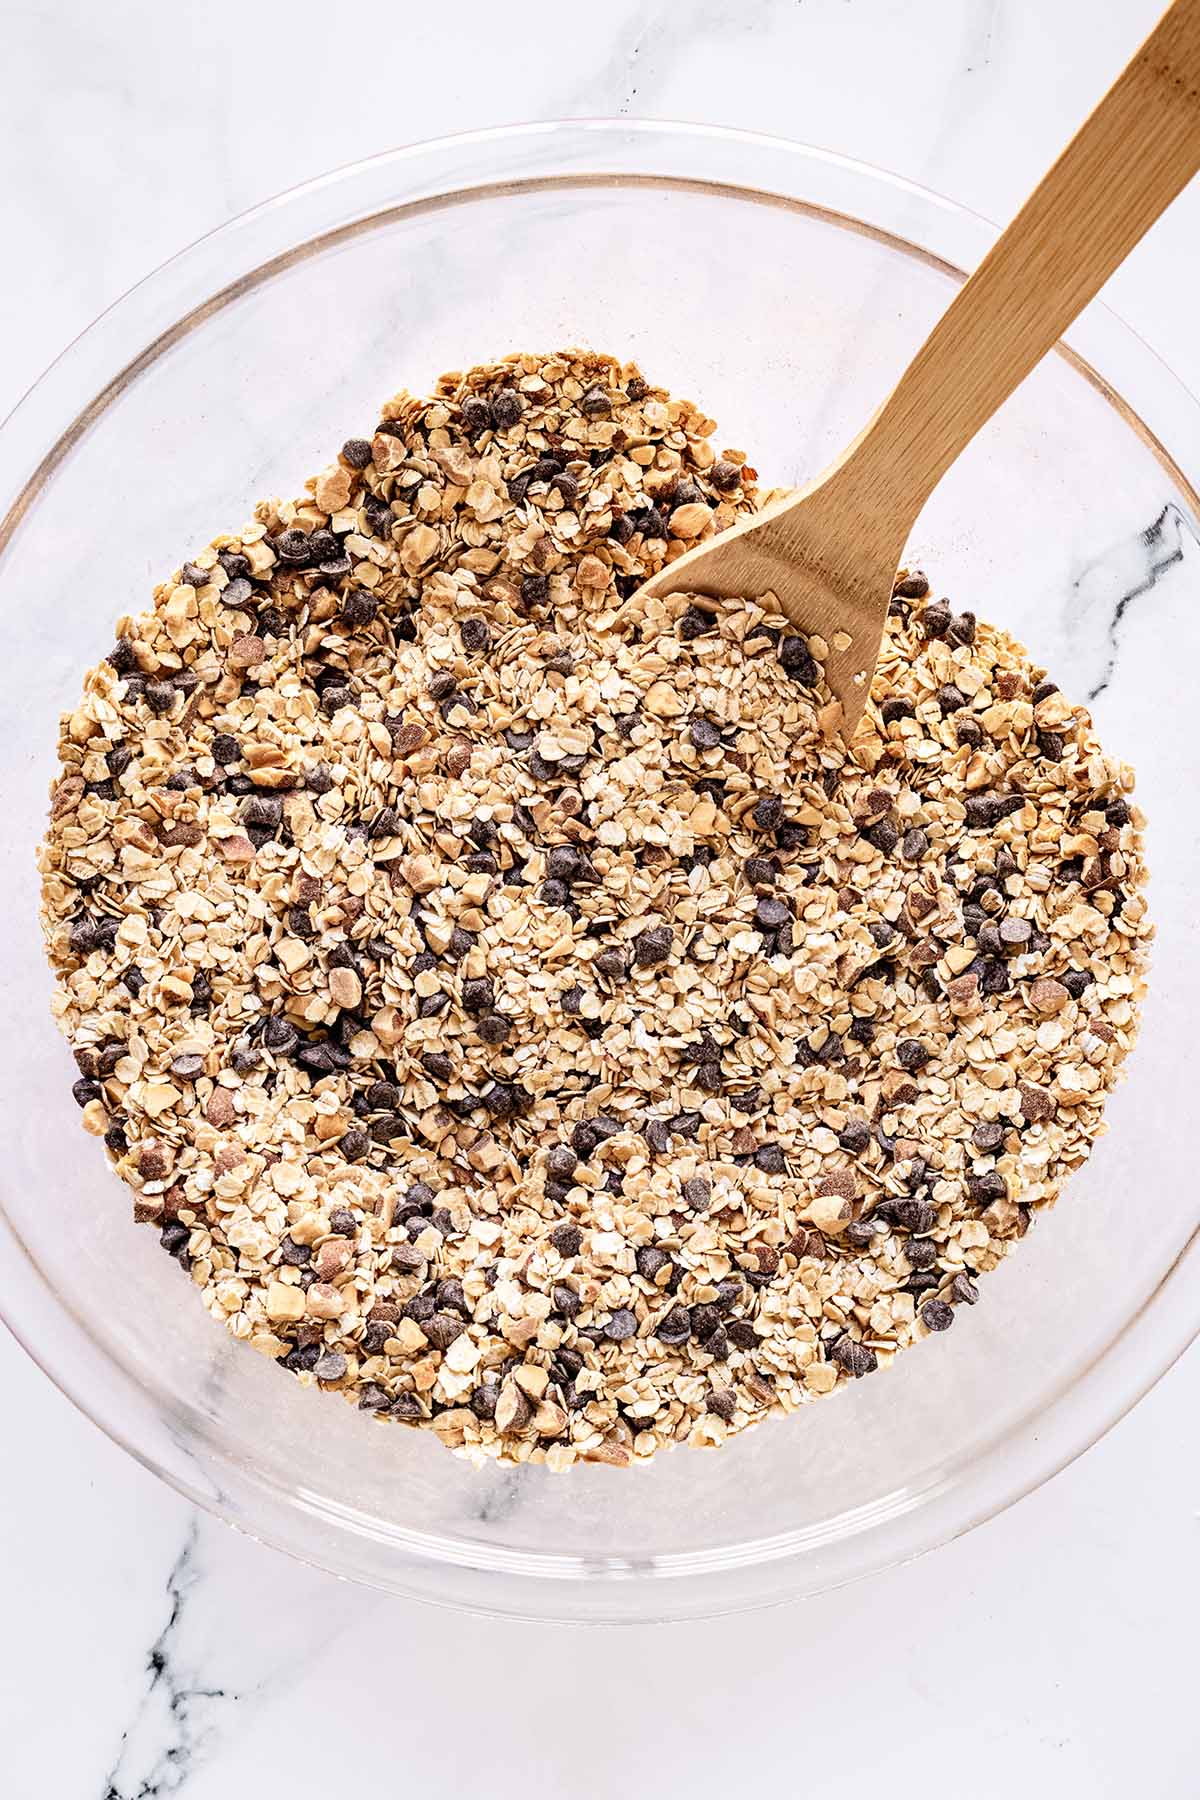 Overhead view of oat mixture in a glass bowl with a wooden spoon